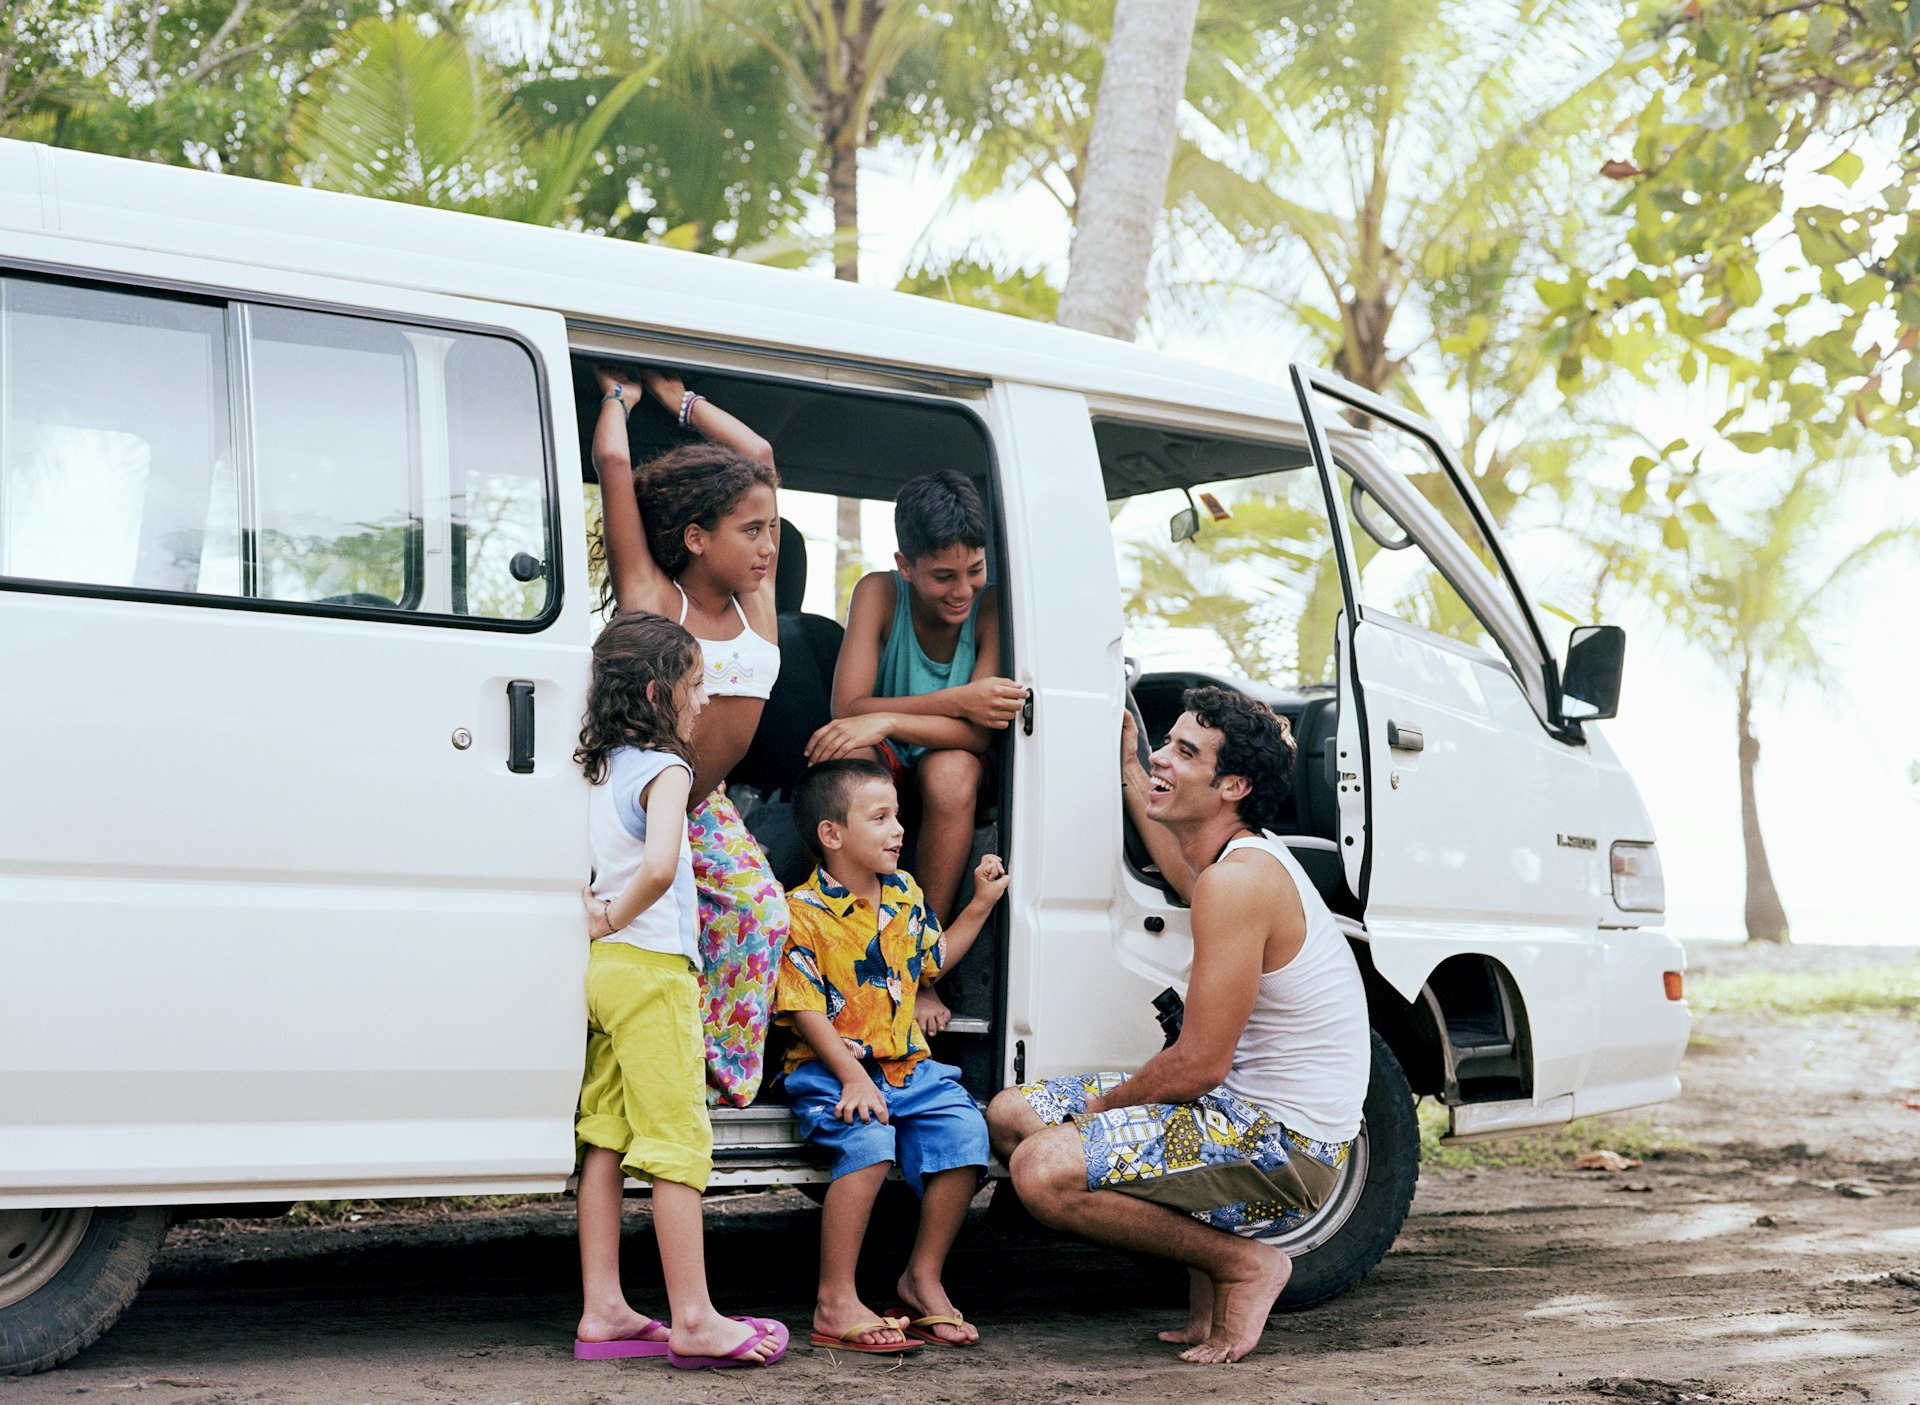 A man crouches down by the open door of a white camper van; four children are inside